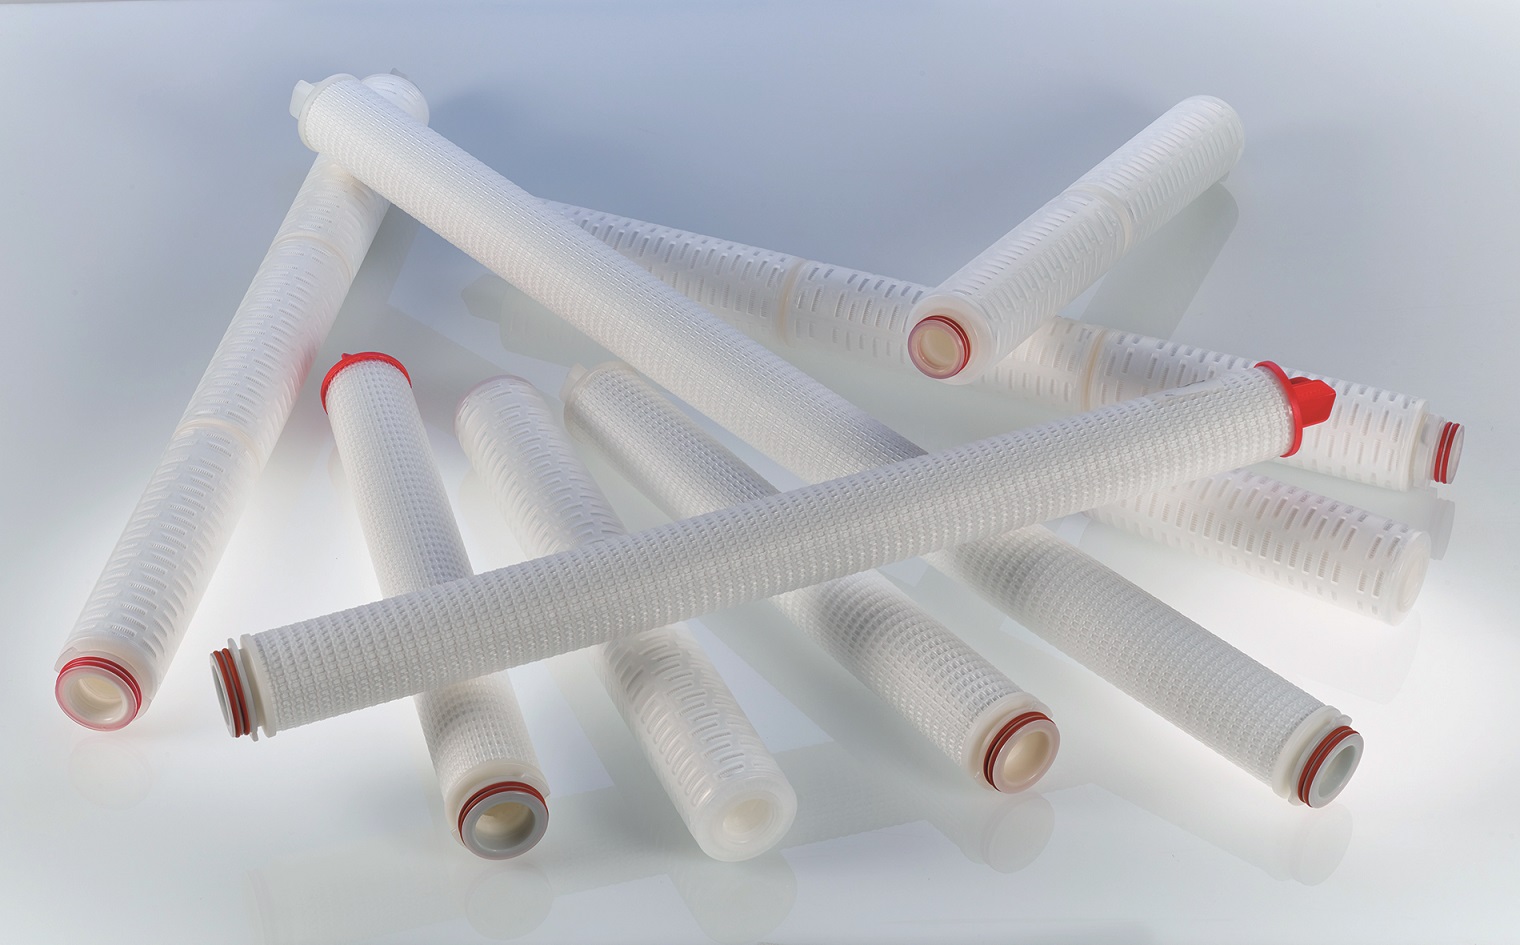 Beco Protect pre-filter cartridges and Beco Membran PS membrane filter cartridges from Eaton’s filter cartridge range can be optimally combined to achieve the desired filtration objective.